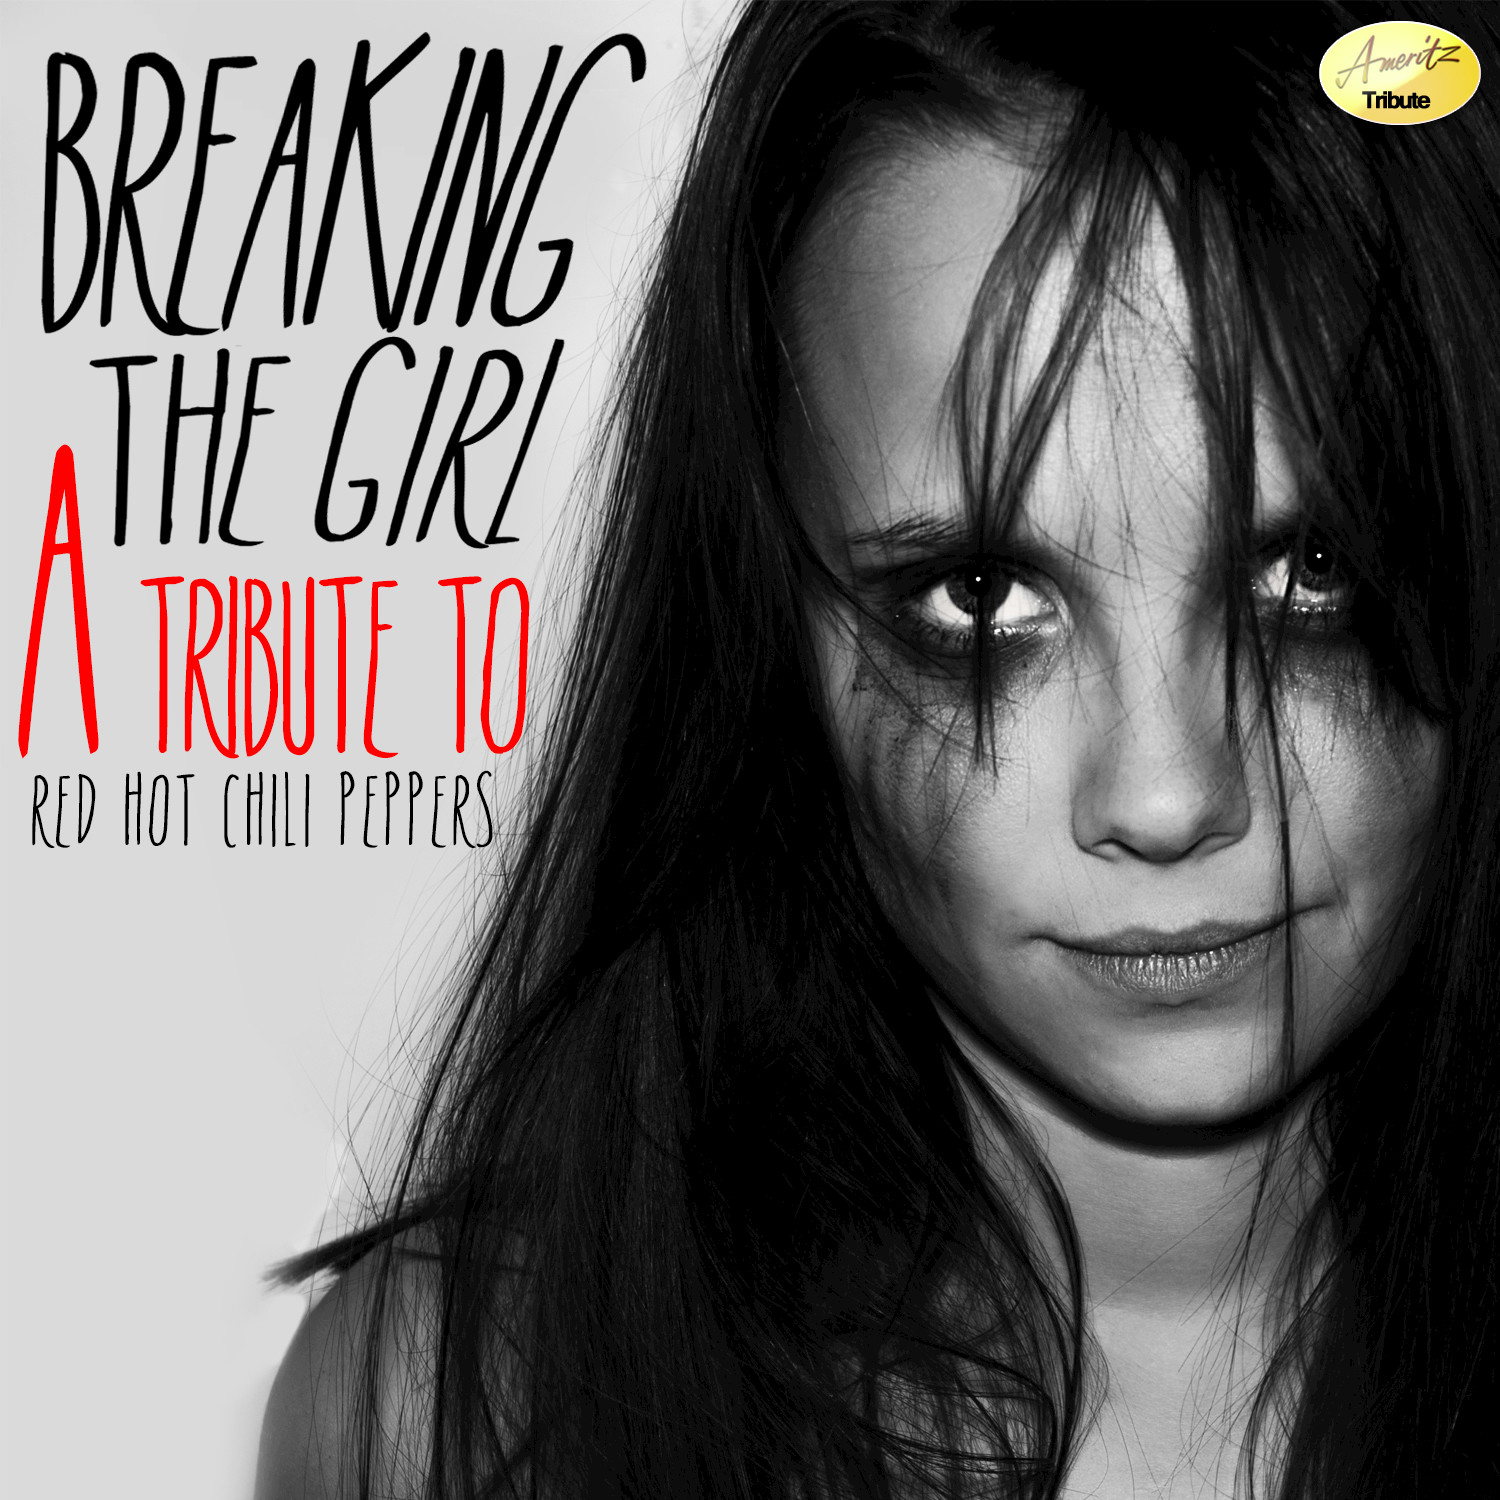 Breaking the Girl (A Tribute to Red Hot Chili Peppers)